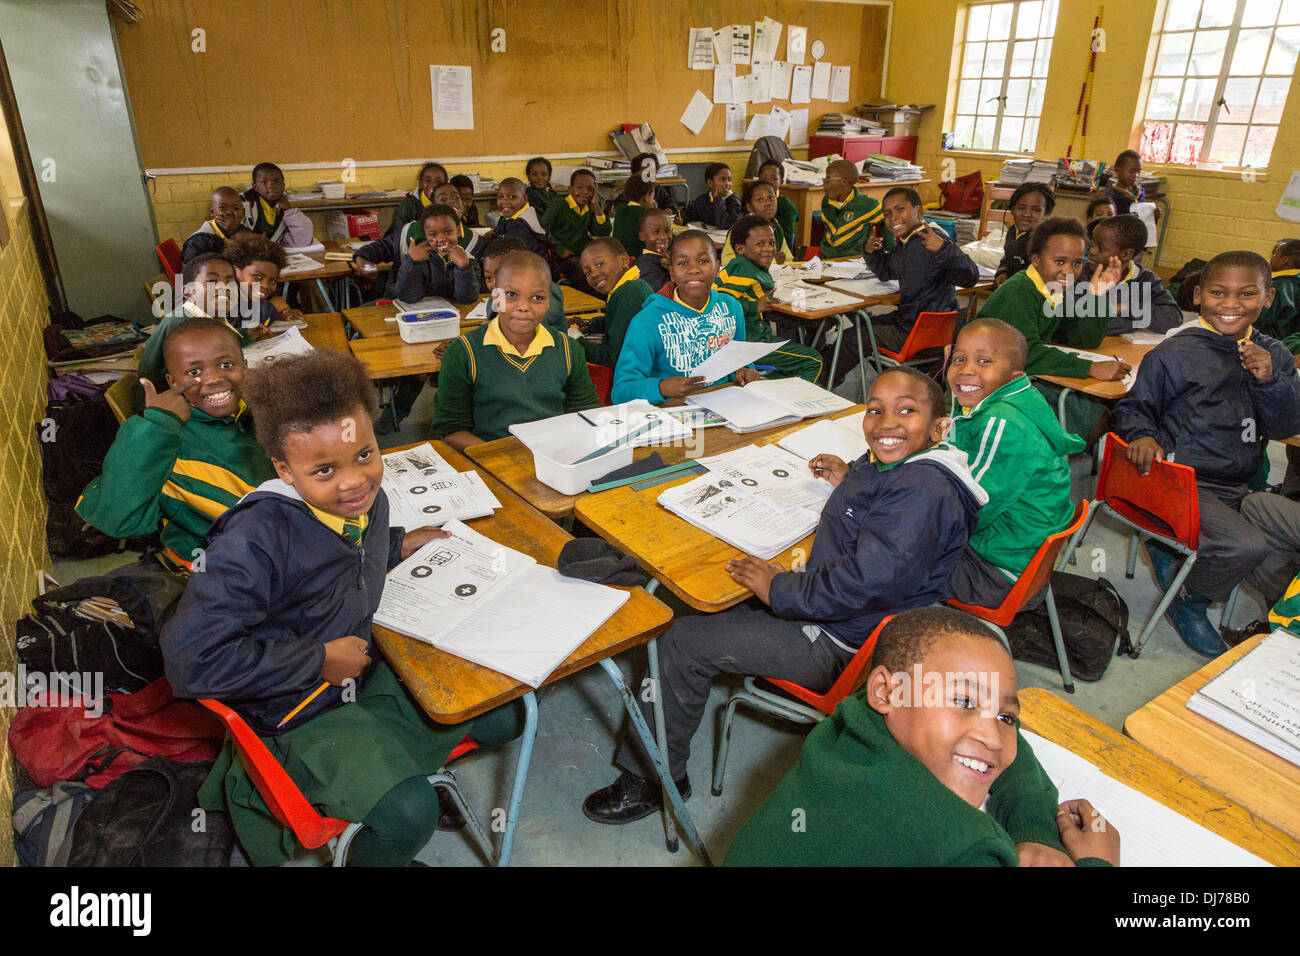 South Africa, Cape Town, Guguletu Township. Intshinga Primary School Children, mostly Xhosa Ethnic Group. Stock Photo